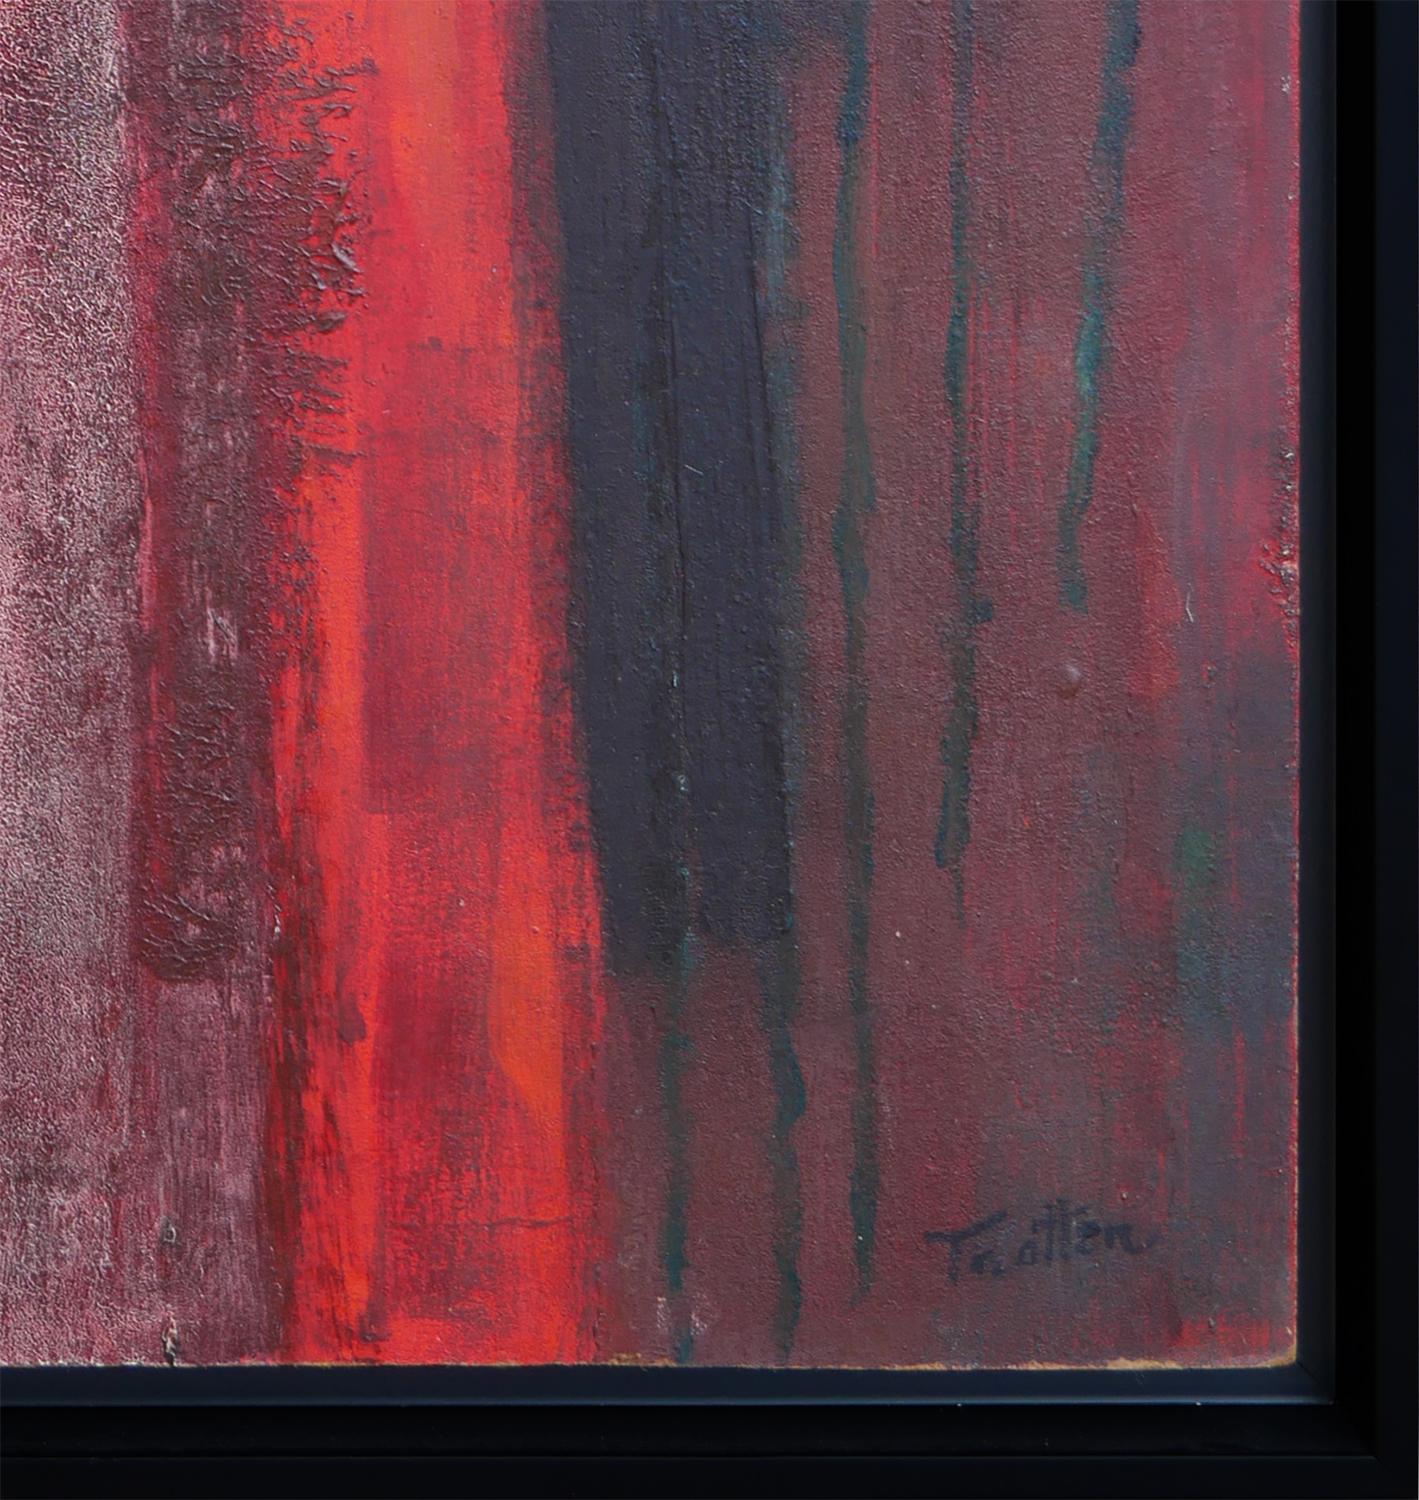 Maroon, red, and orange abstract modernist painting by known Houston, TX artist McKie Trotter. This painting depicts a large maroon form with a bright pink vertical brushstroke in the middle against a warm orange background. Signed by the artist at